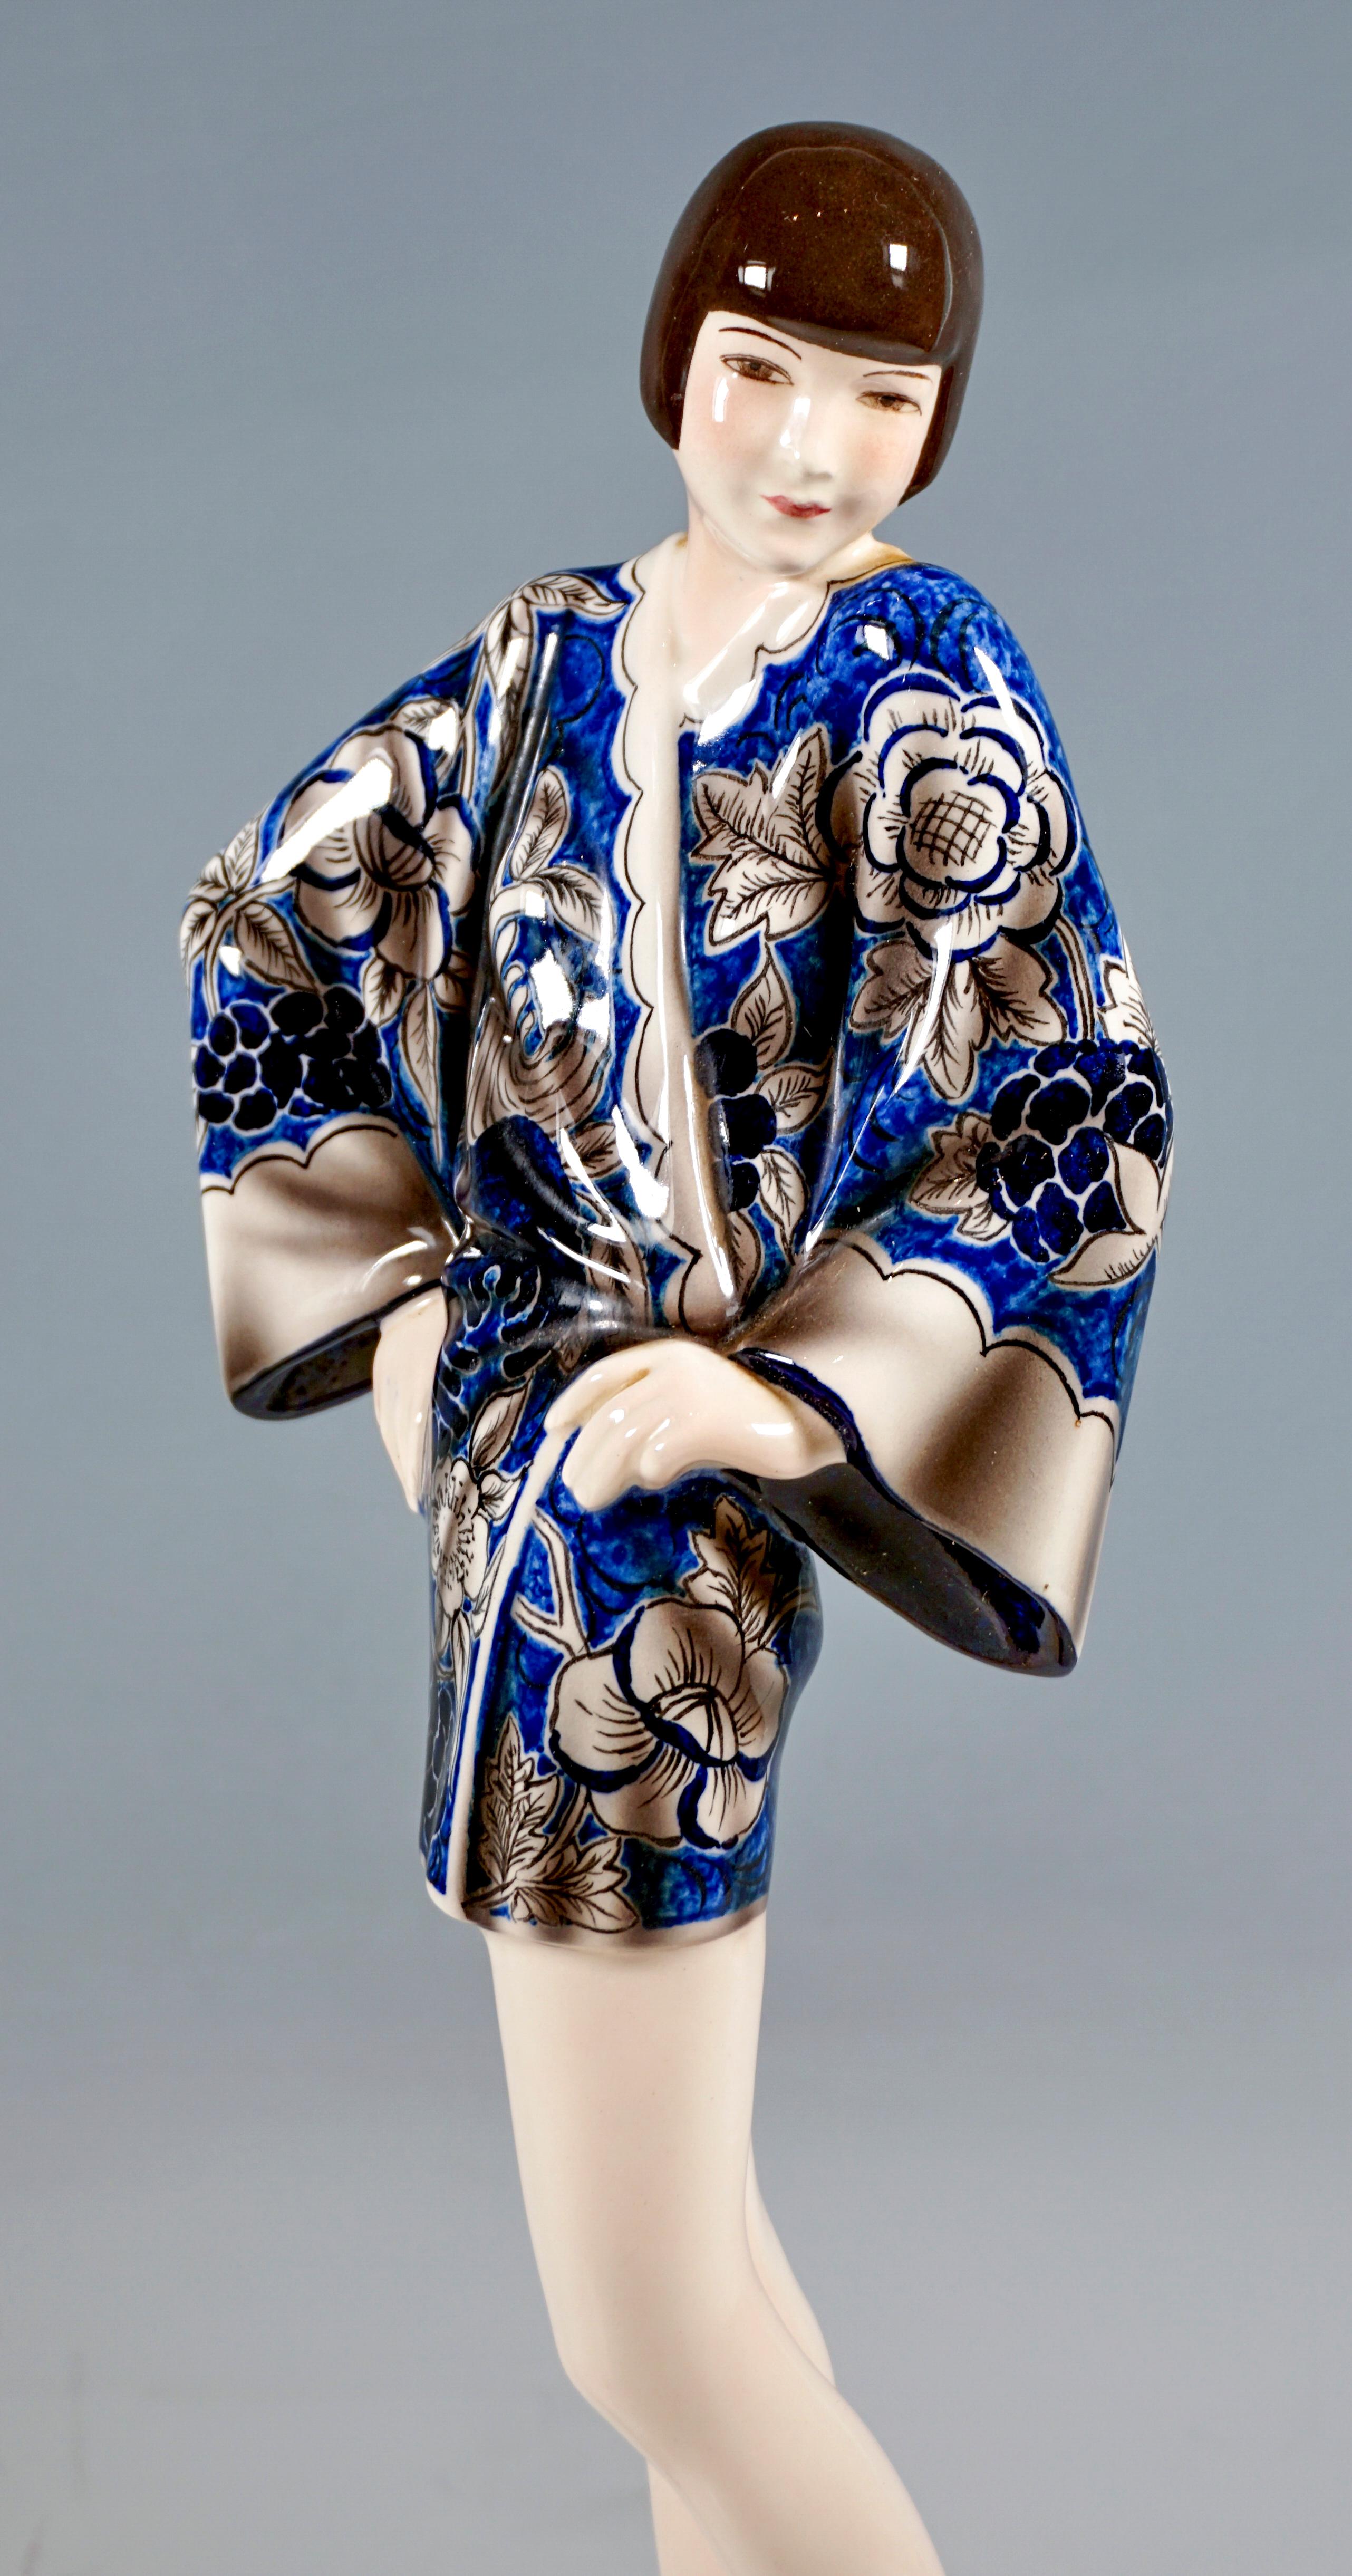 Hand-Crafted Goldscheider Art Déco Figure 'Kimono' Young Lady in Kimono by Stephan Dakon 1930 For Sale